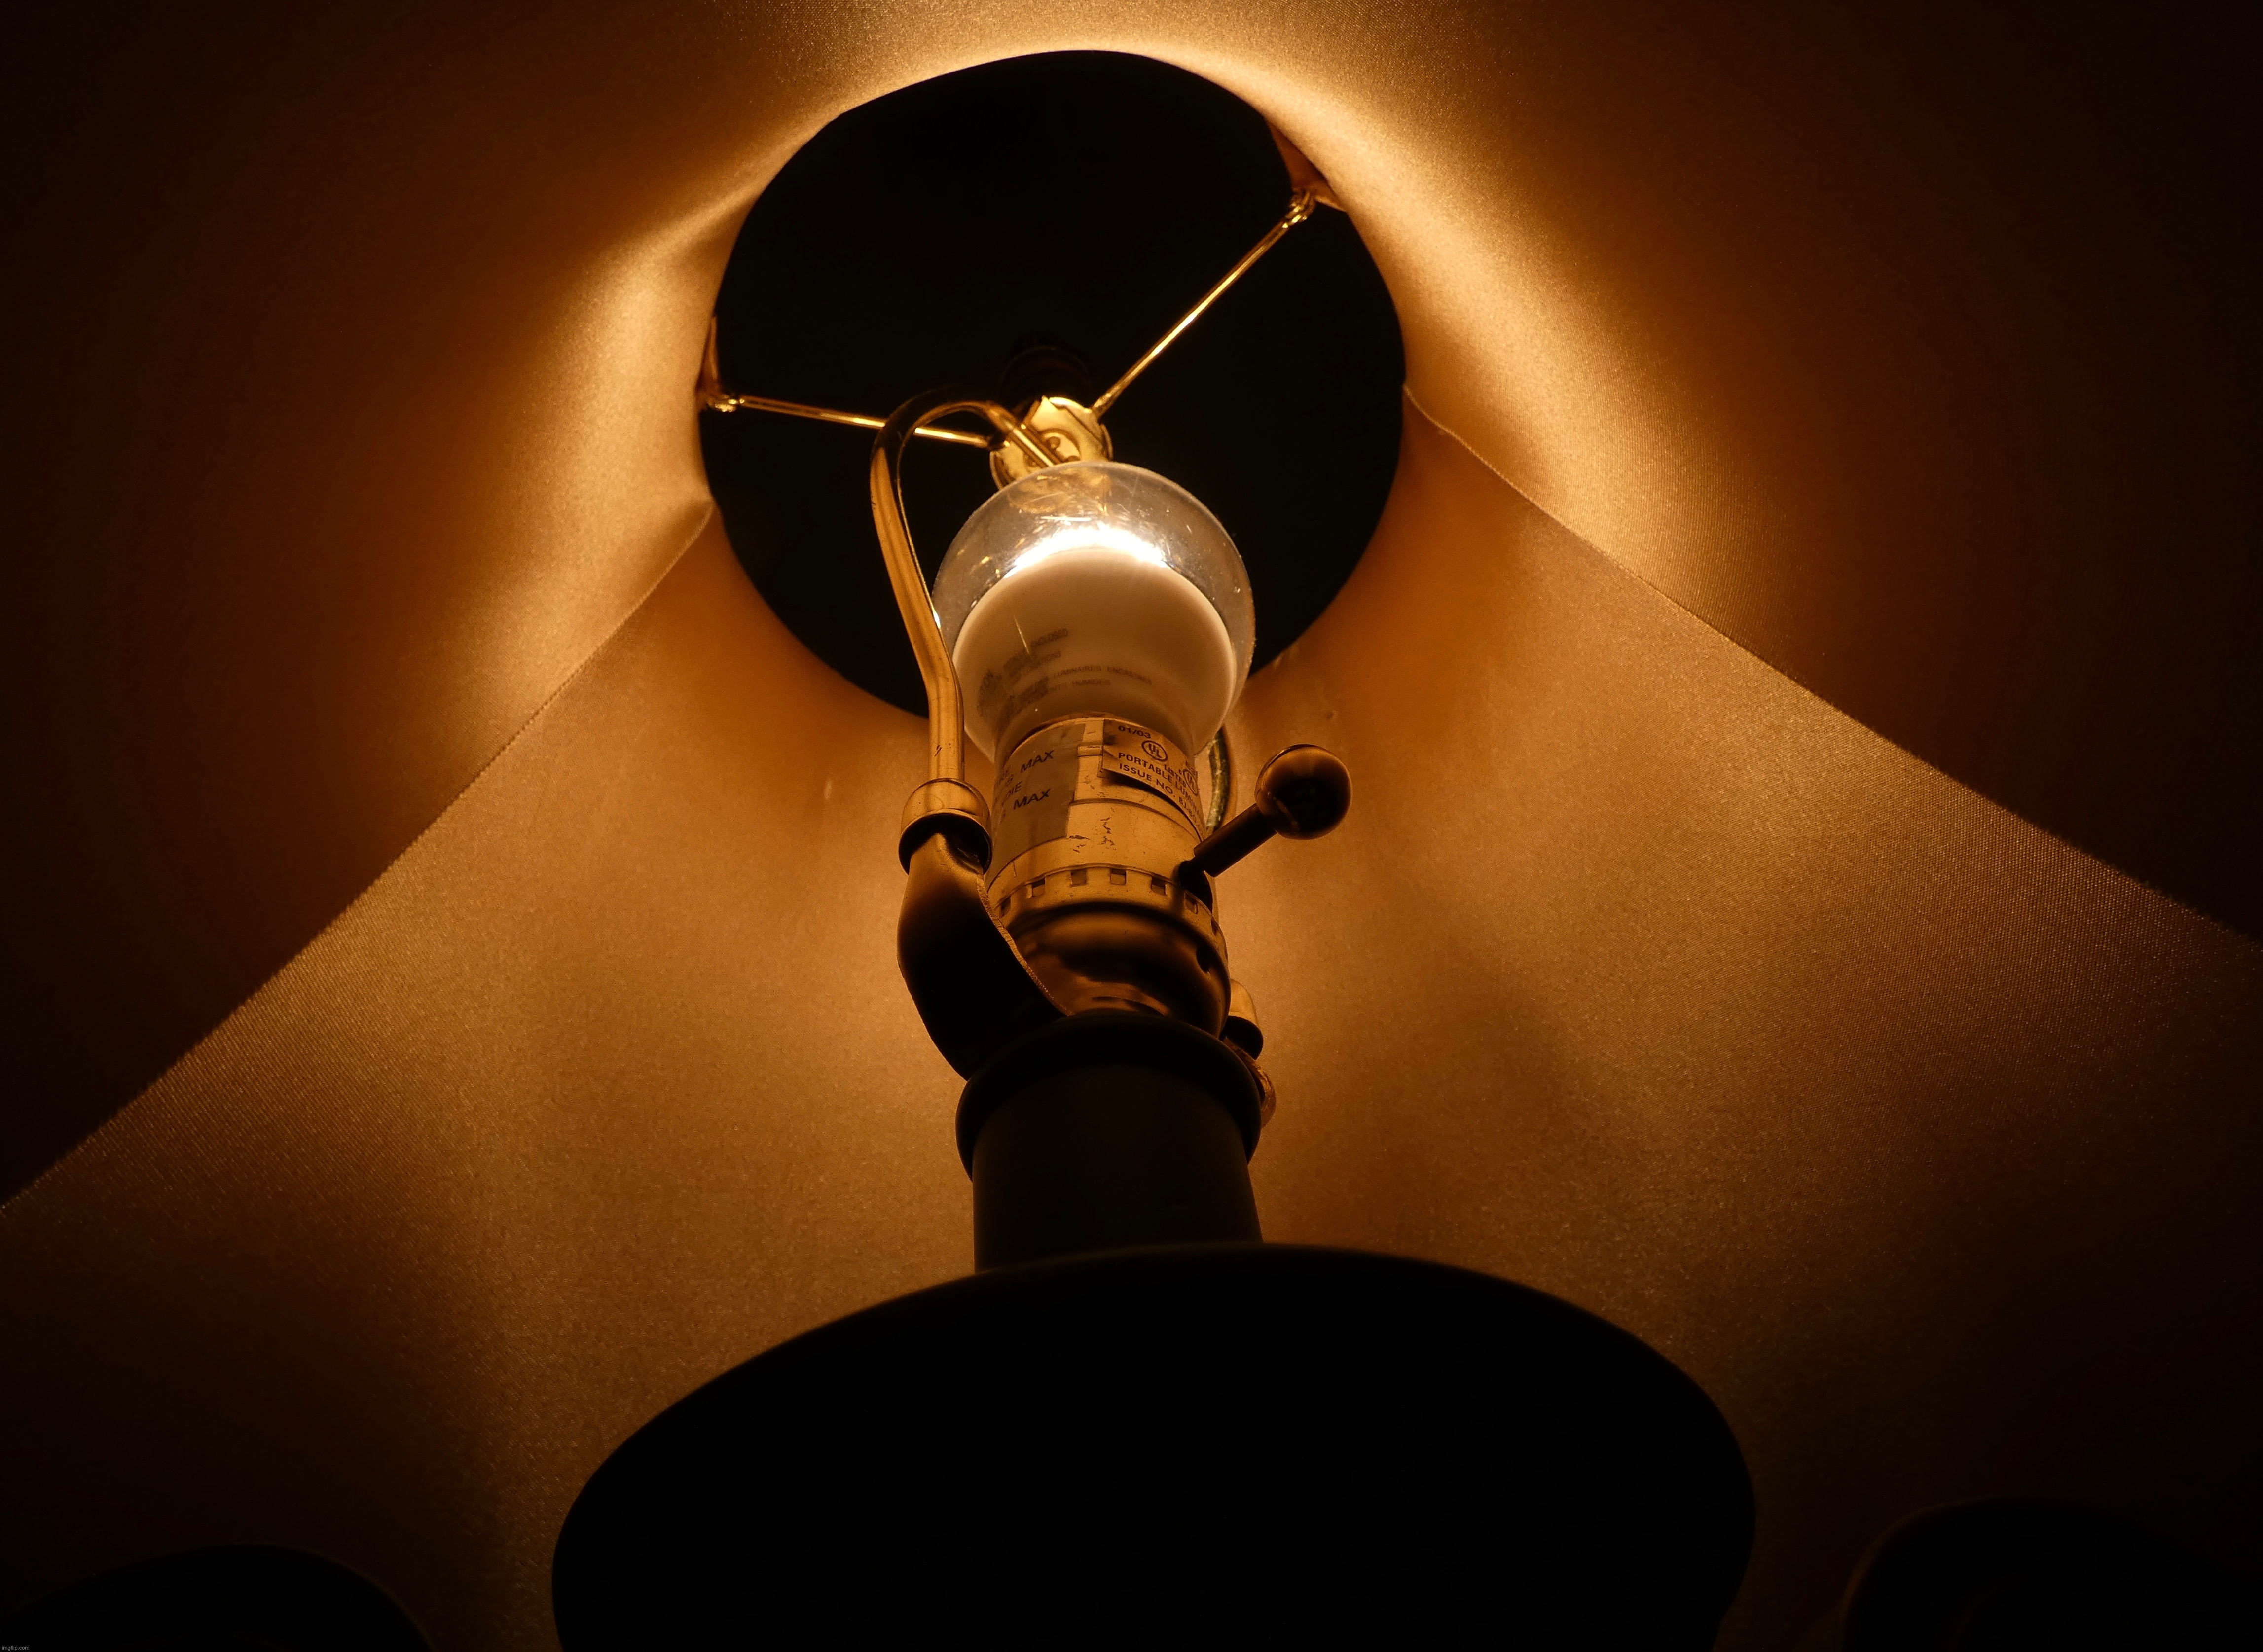 Bulb in lamp | image tagged in share your own photos,panasonic lumix fz80 | made w/ Imgflip meme maker